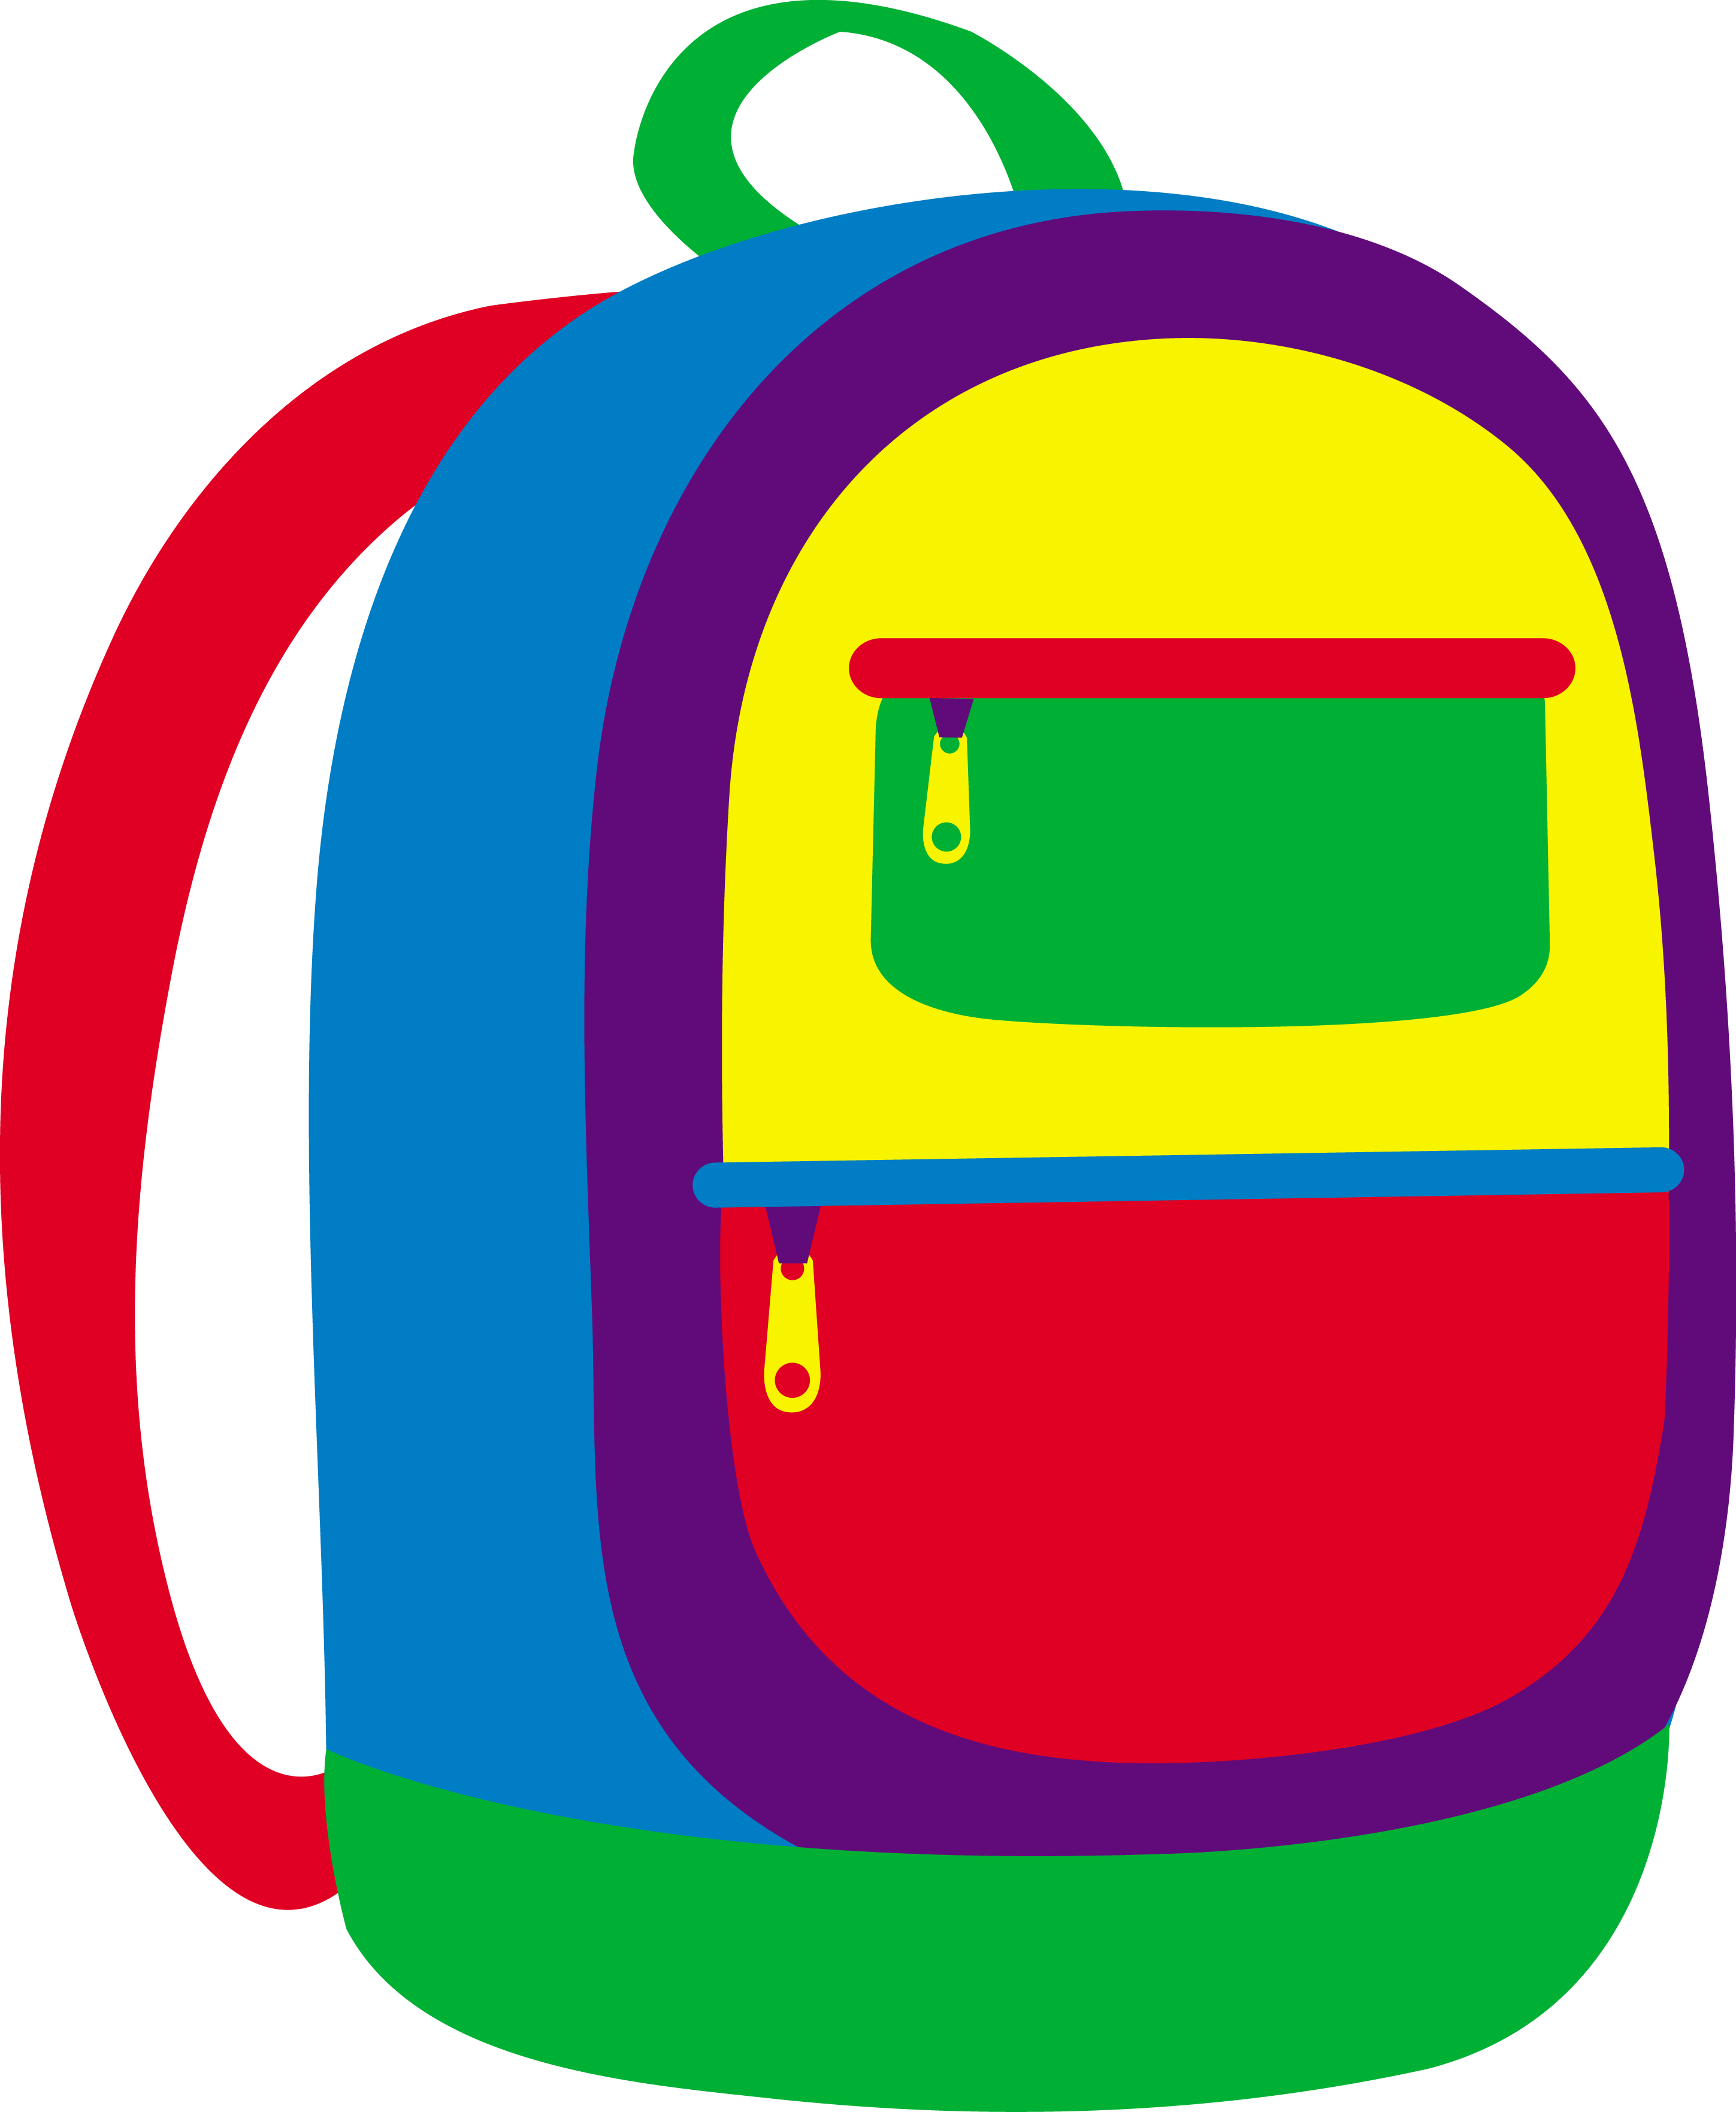 Colorful Childrens School Backpack - Free Clip Art